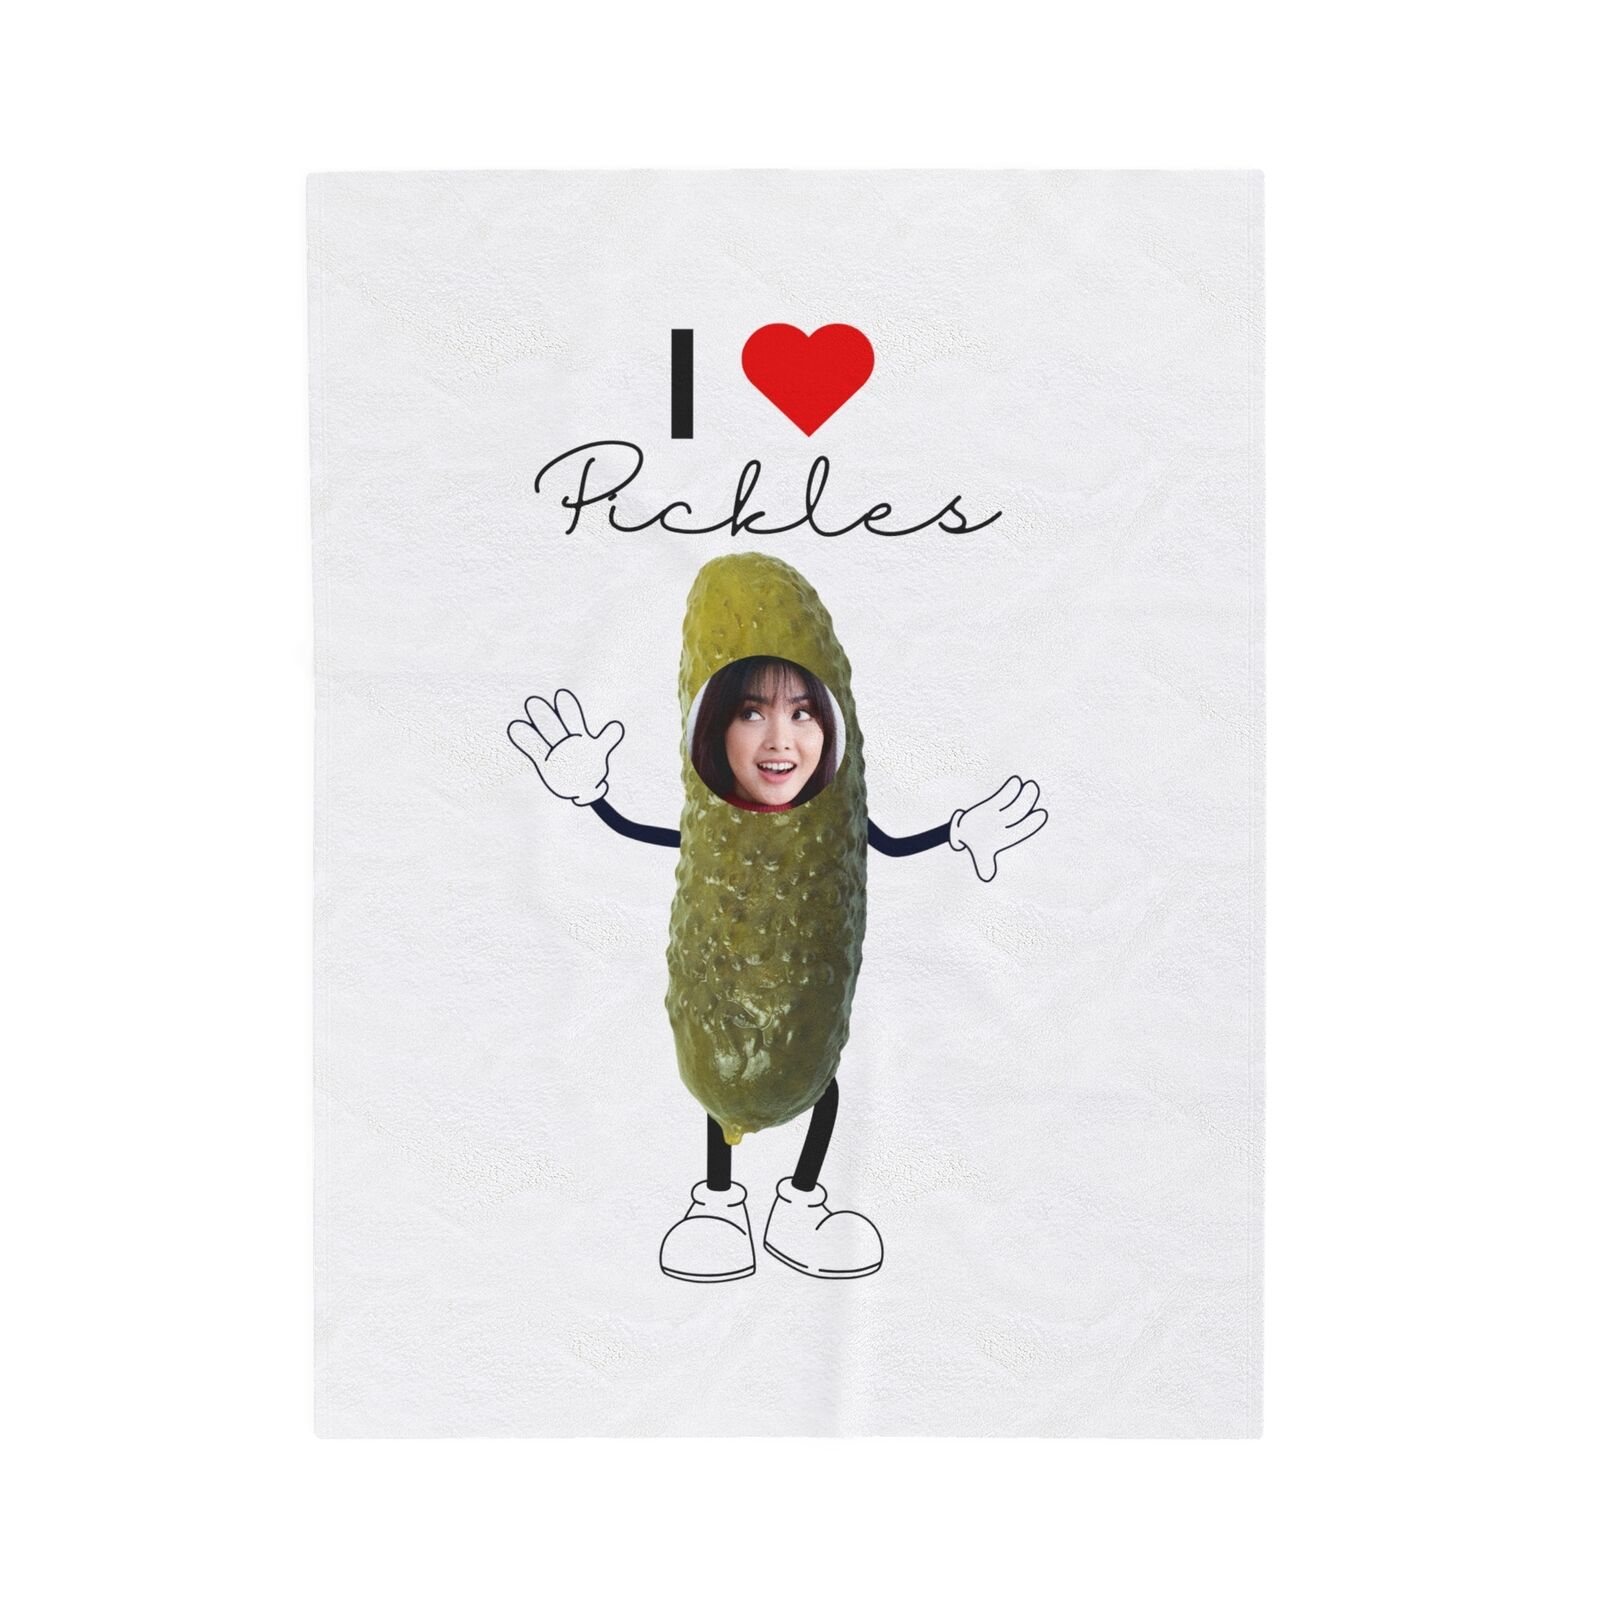 Wrap up in pickles and enjoy a plush blanket with comfort for foodie